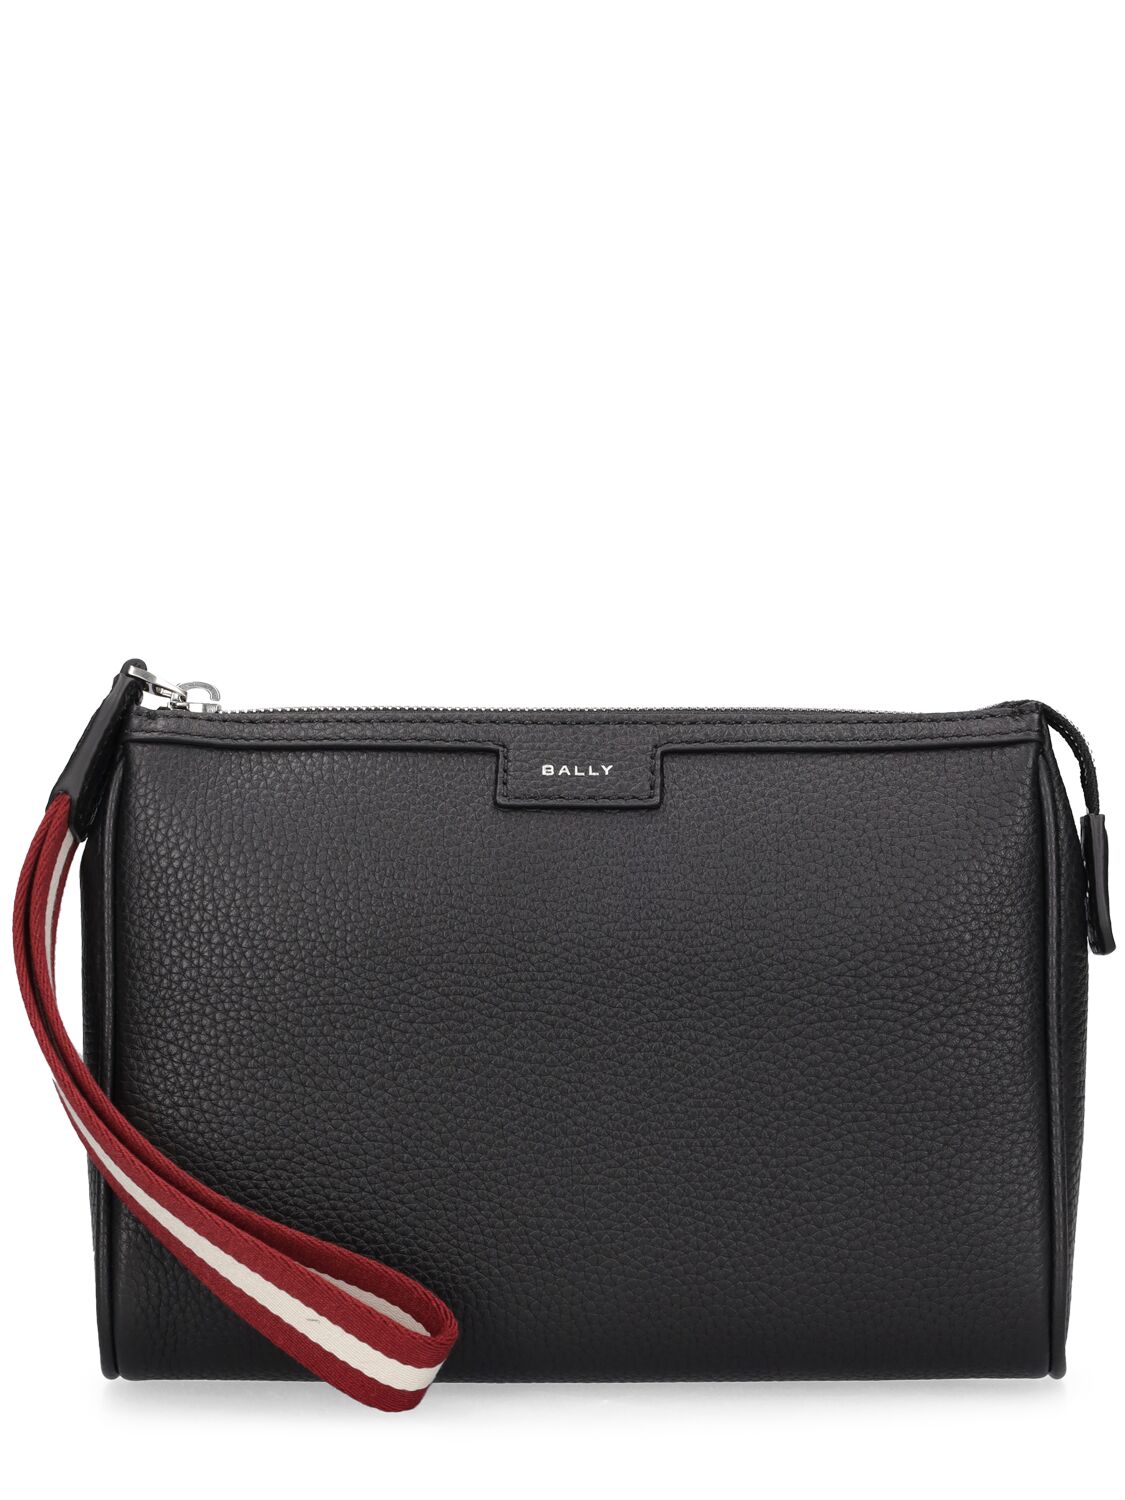 Image of Code Leather Clutch